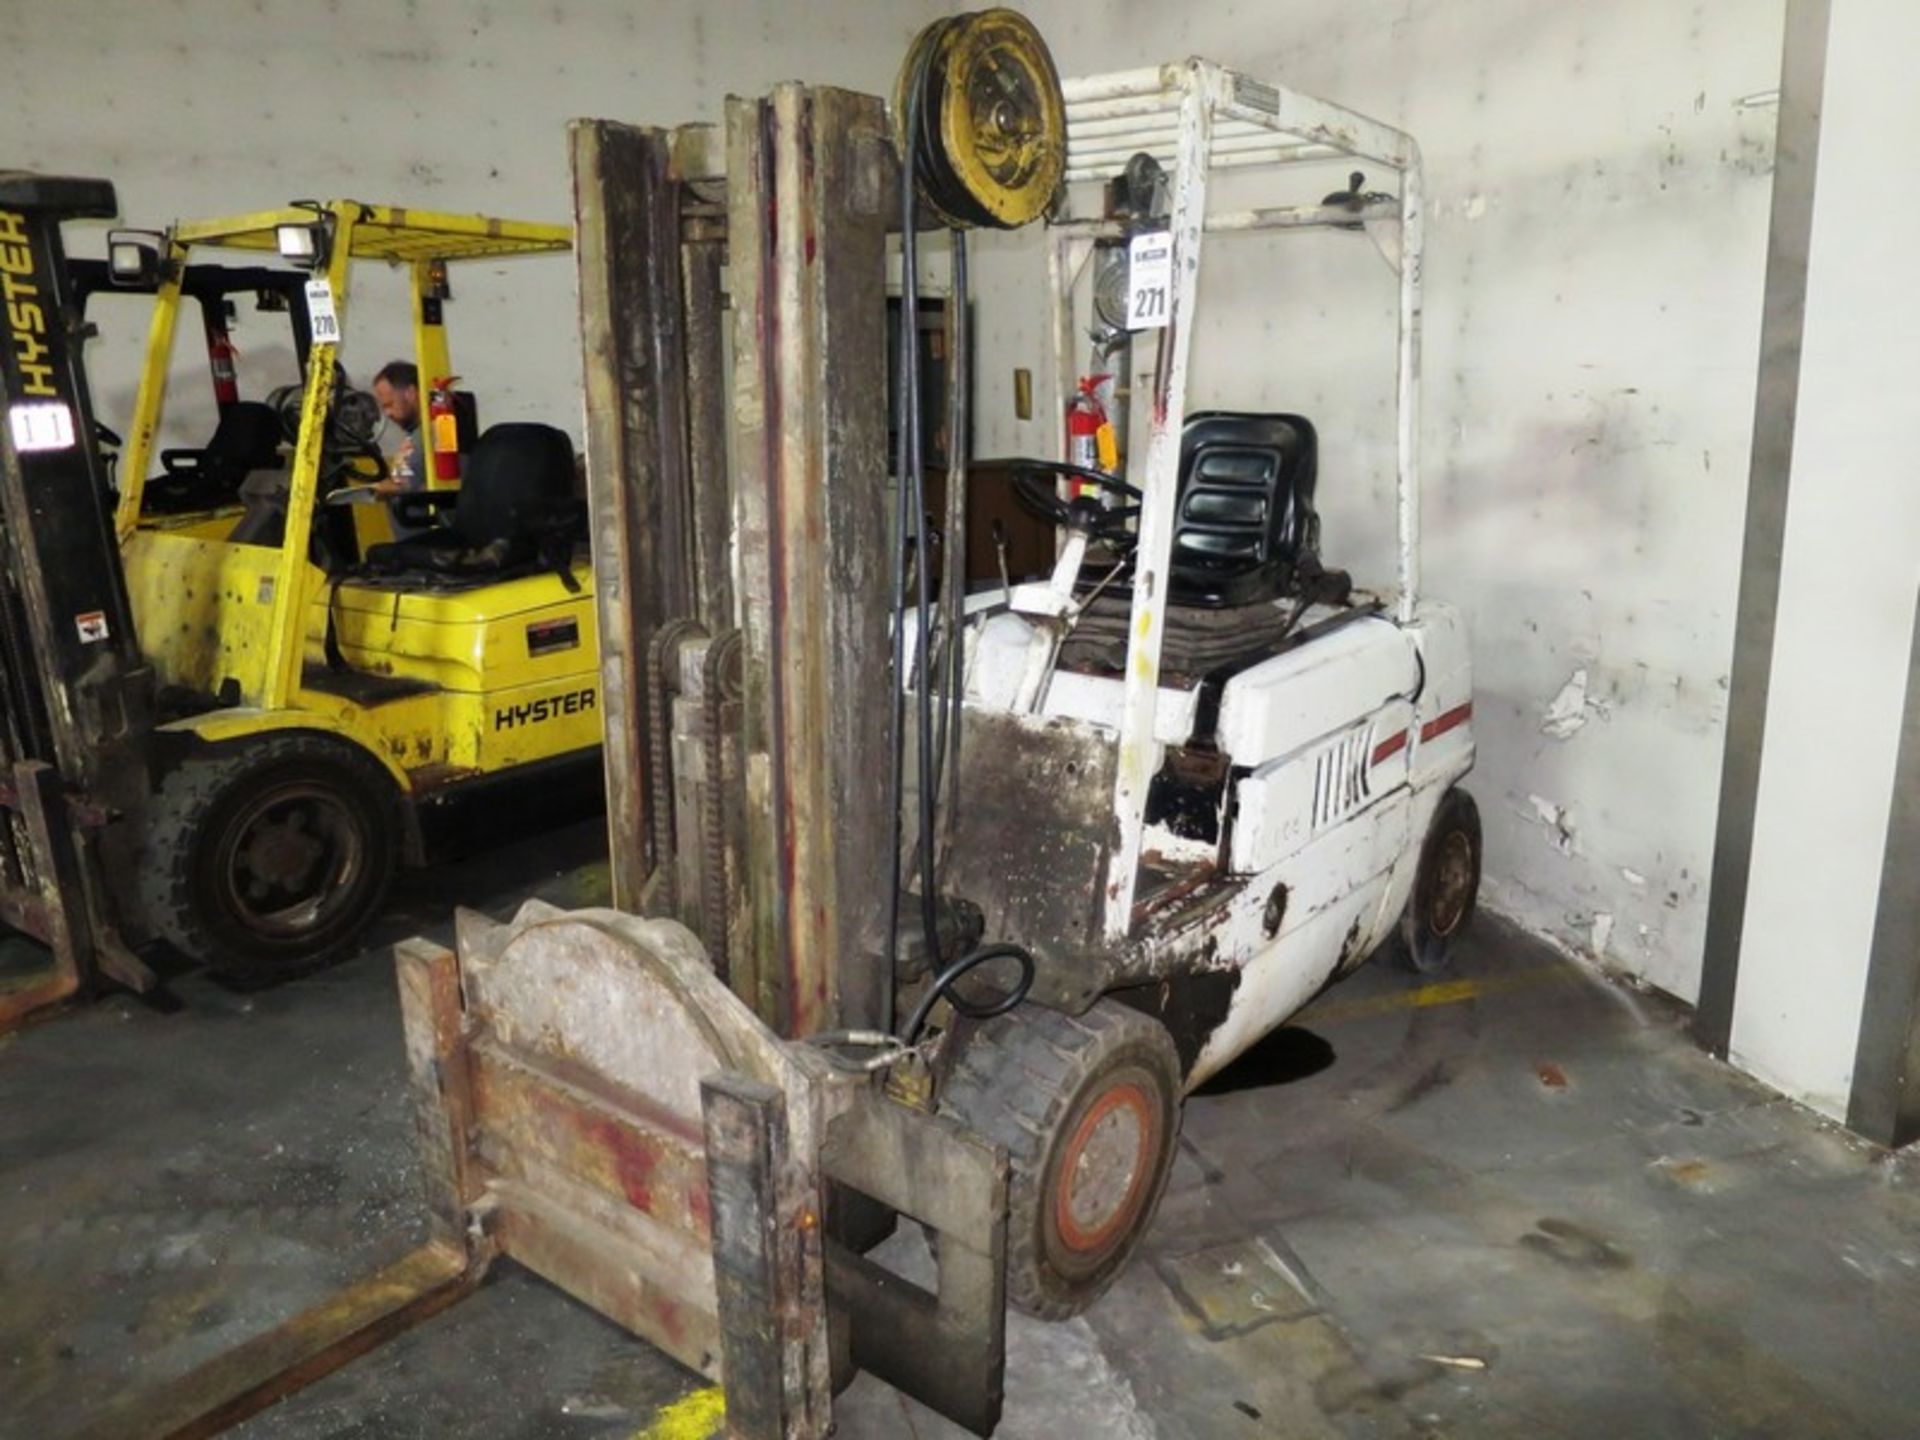 8,000 lbs. Baker Model B80PD Lift Truck S/N: 331-30501-0730, Max Height 170", 1983, Has Rotator with